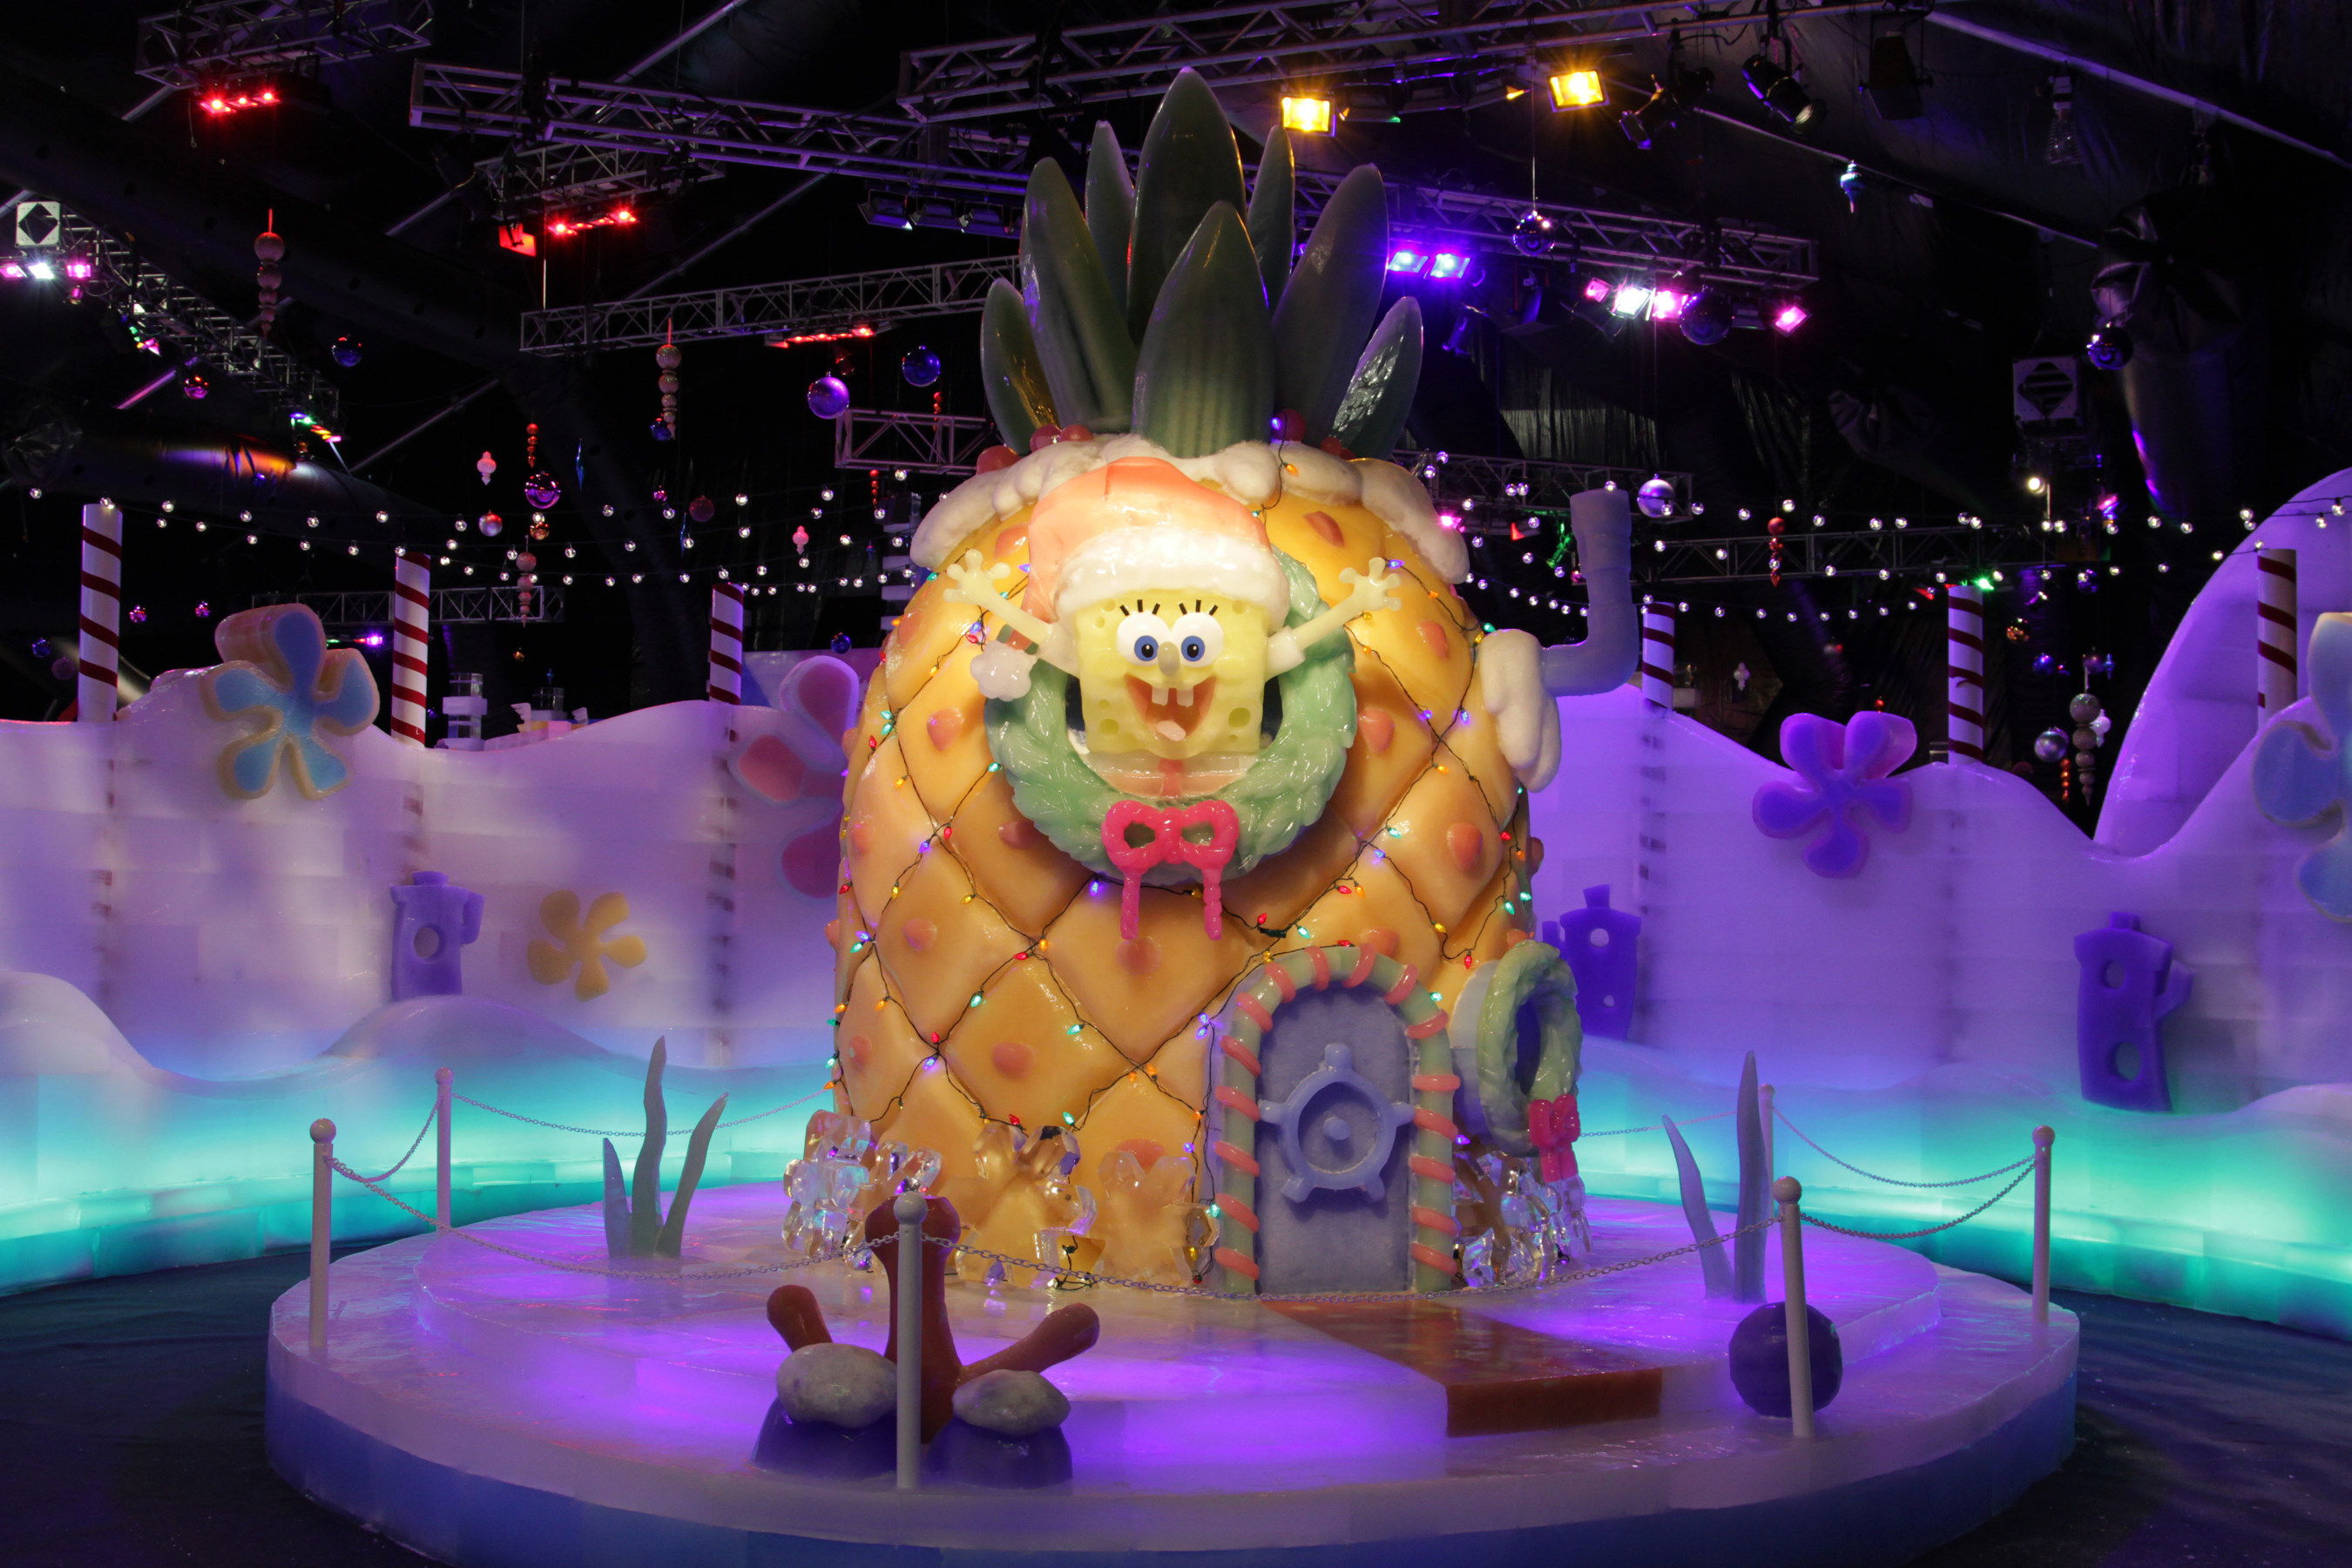 The highly anticipated ICE LAND Ice Sculptures with SpongeBob SquarePants Opened at Moody Gardens in Galveston, Texas opened to an enthusiastic crowd Saturday as the regions first ice sculpture attraction.